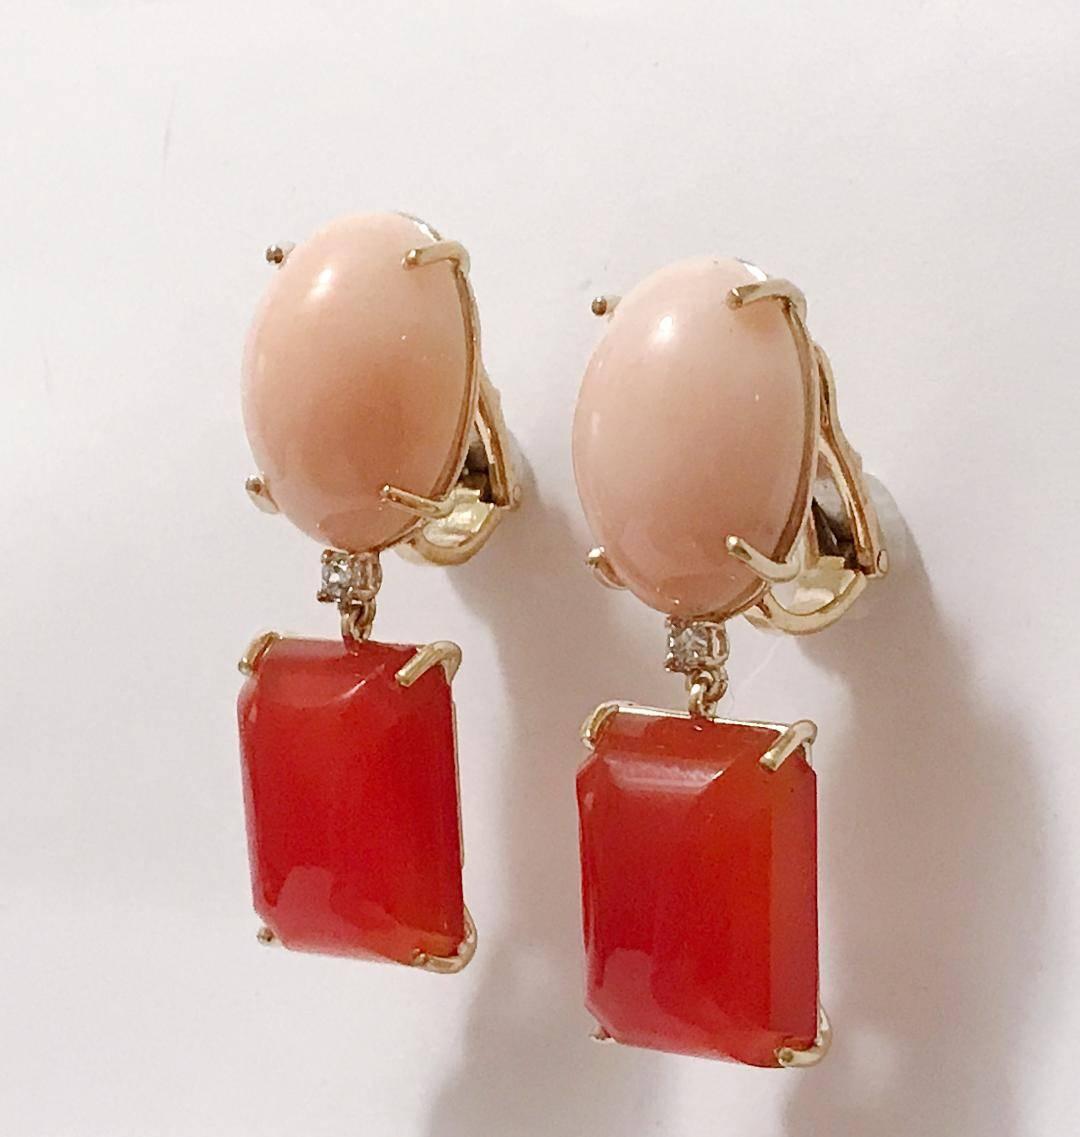 Andrew Clunn Geometric Drop Earring with Oval Coral and Rectangular Carnelian with a center Diamond stone.

18kt Yellow Gold with omega back.

These can be posted or clip on.

Please Let me know if you have any questions.
Best,
Christina 